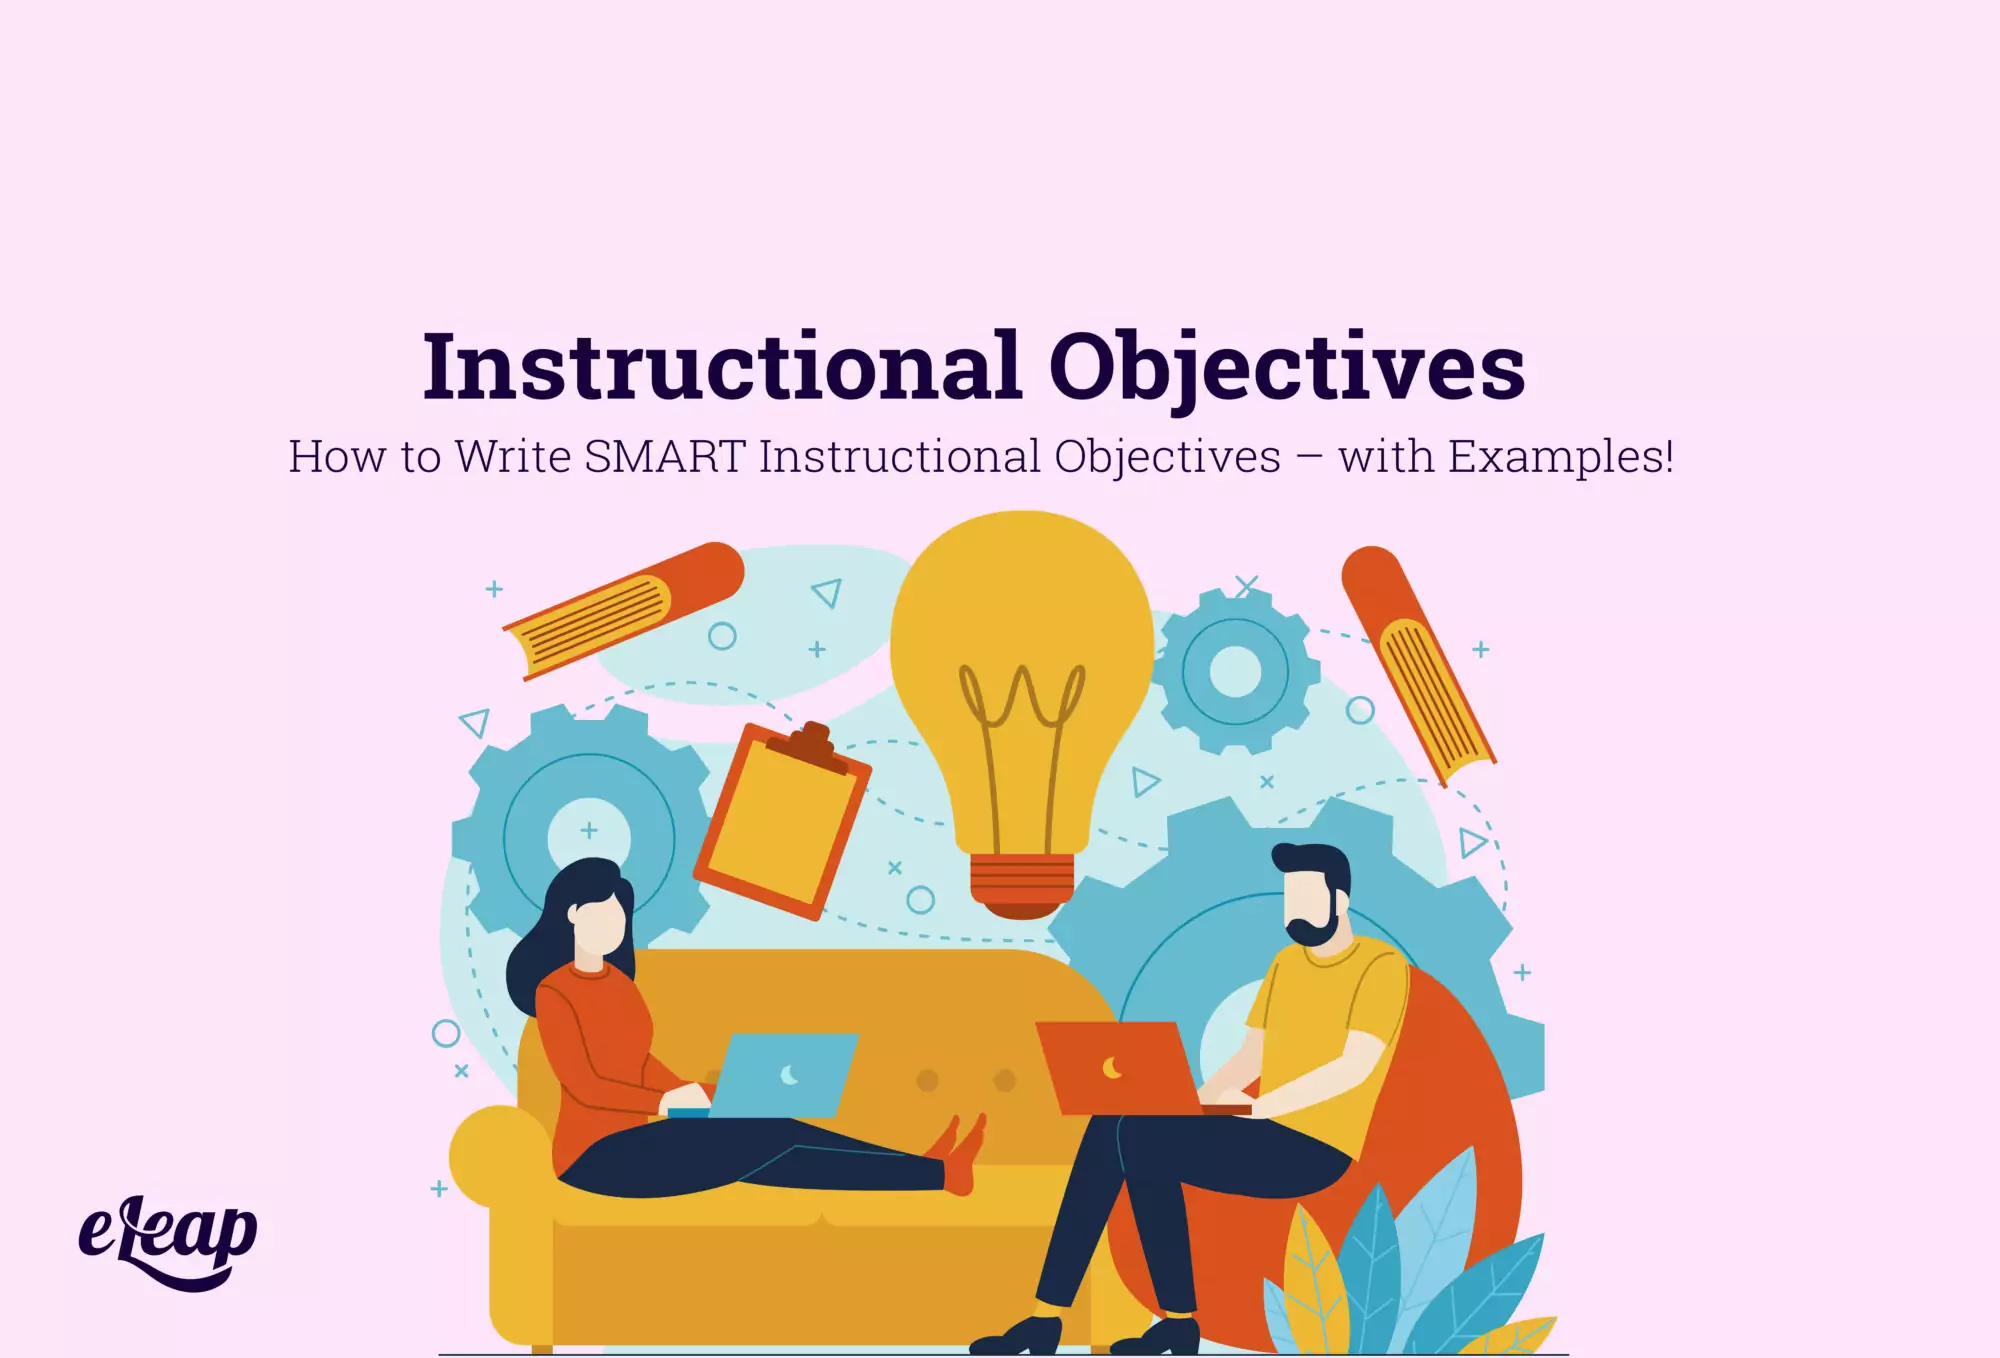 How to Write SMART Instructional Objectives – with Examples!